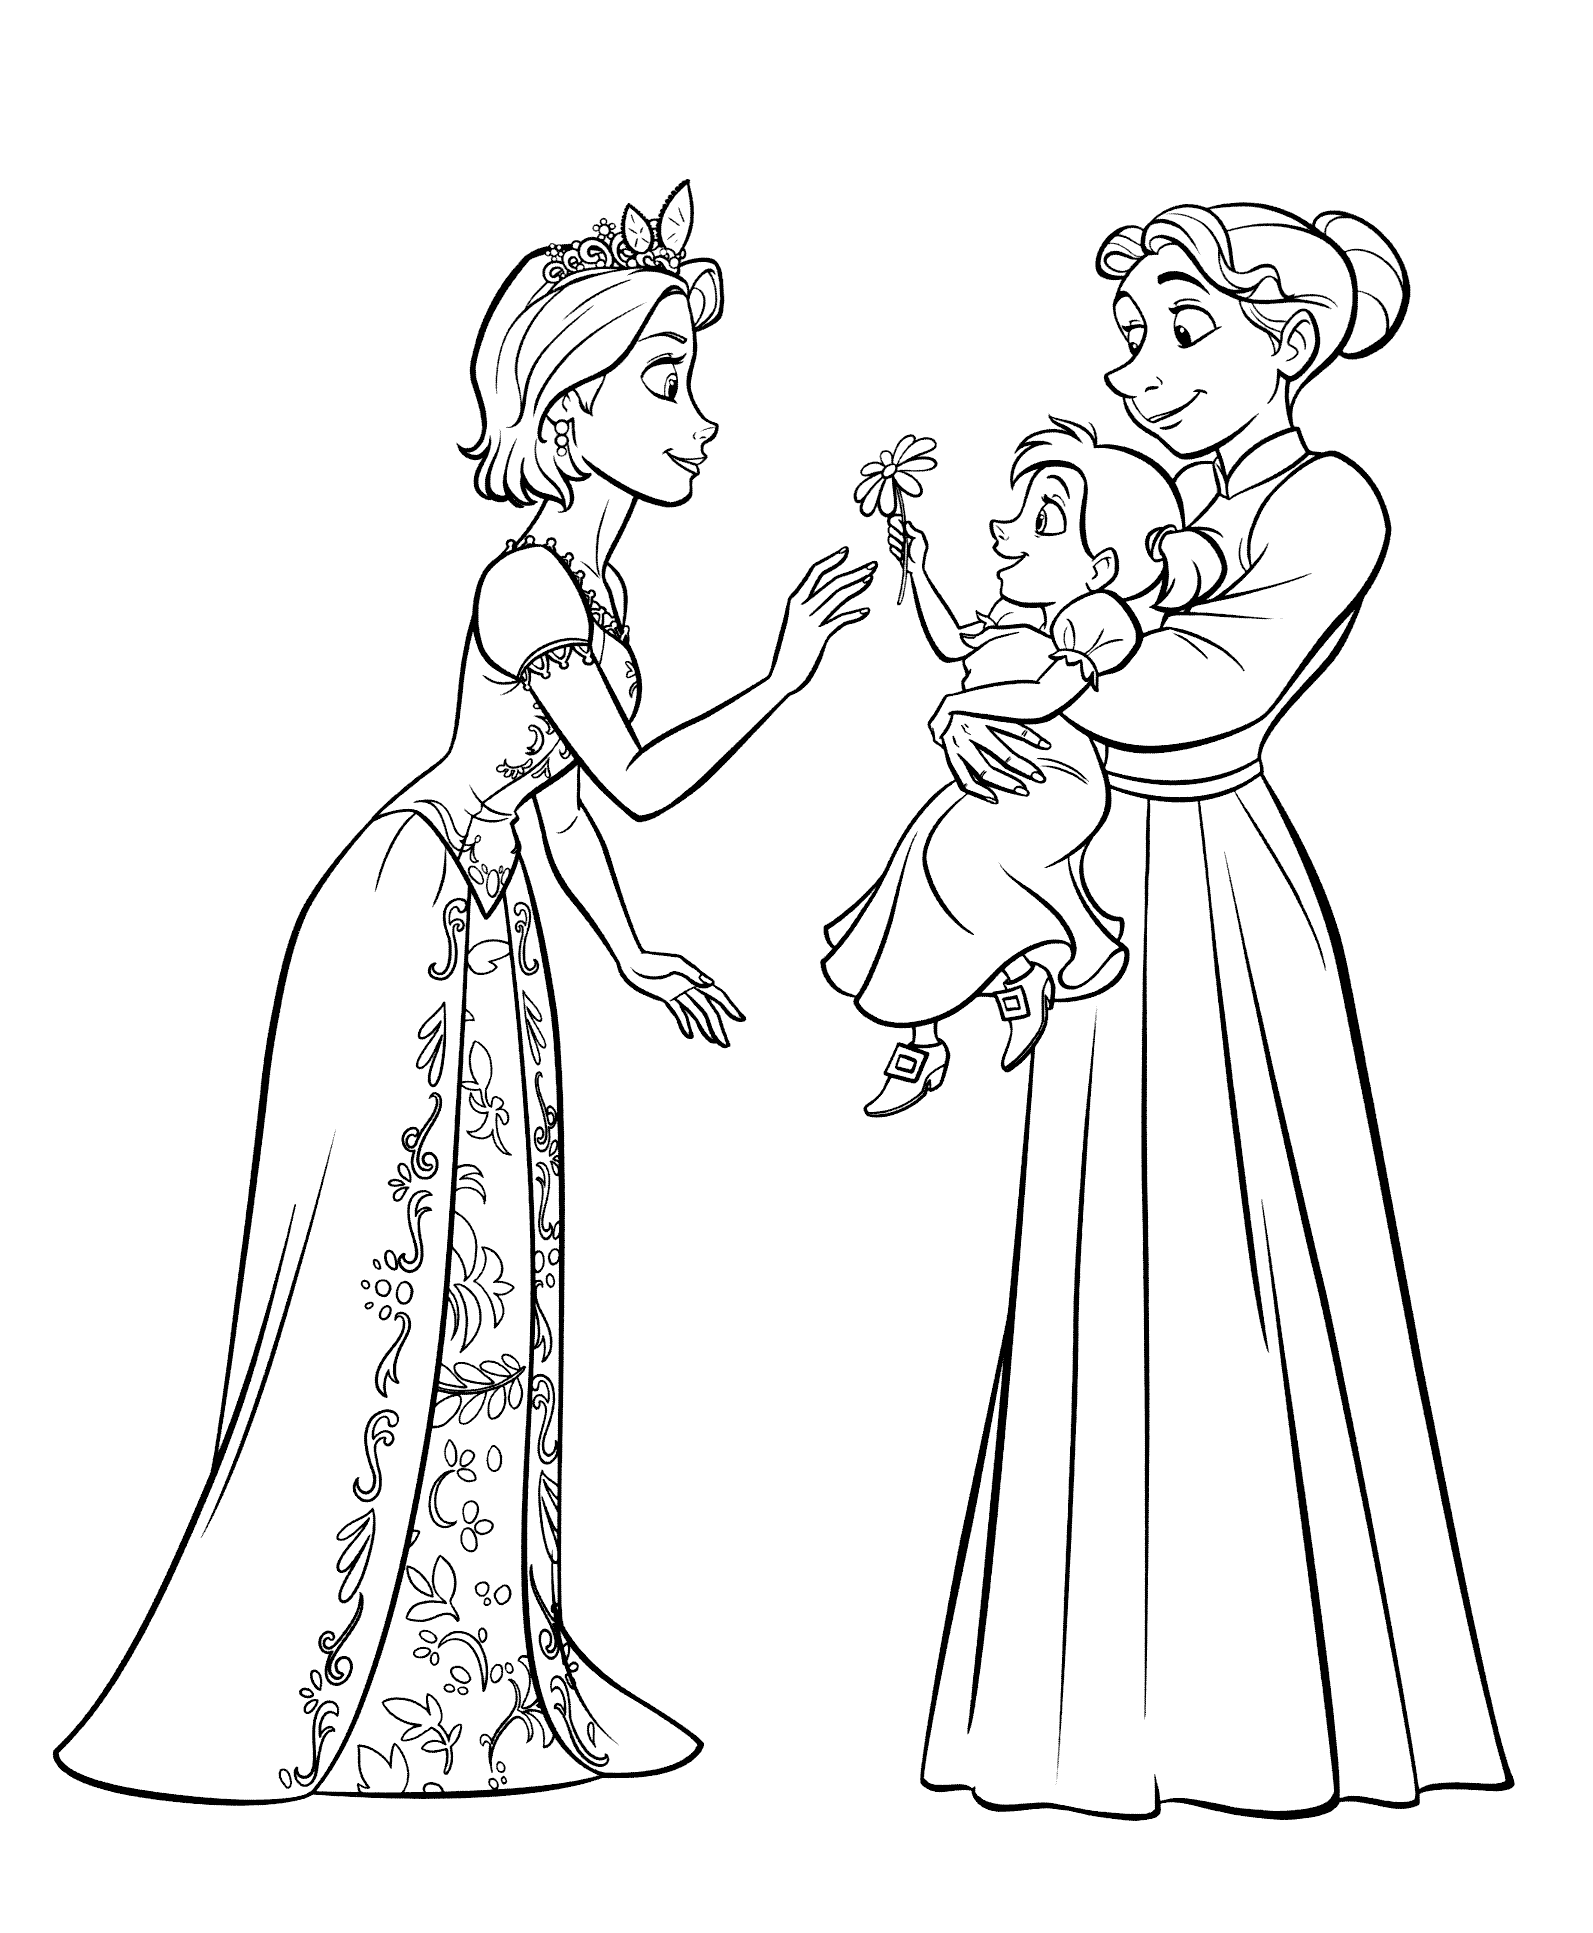 Coloring page - Baby